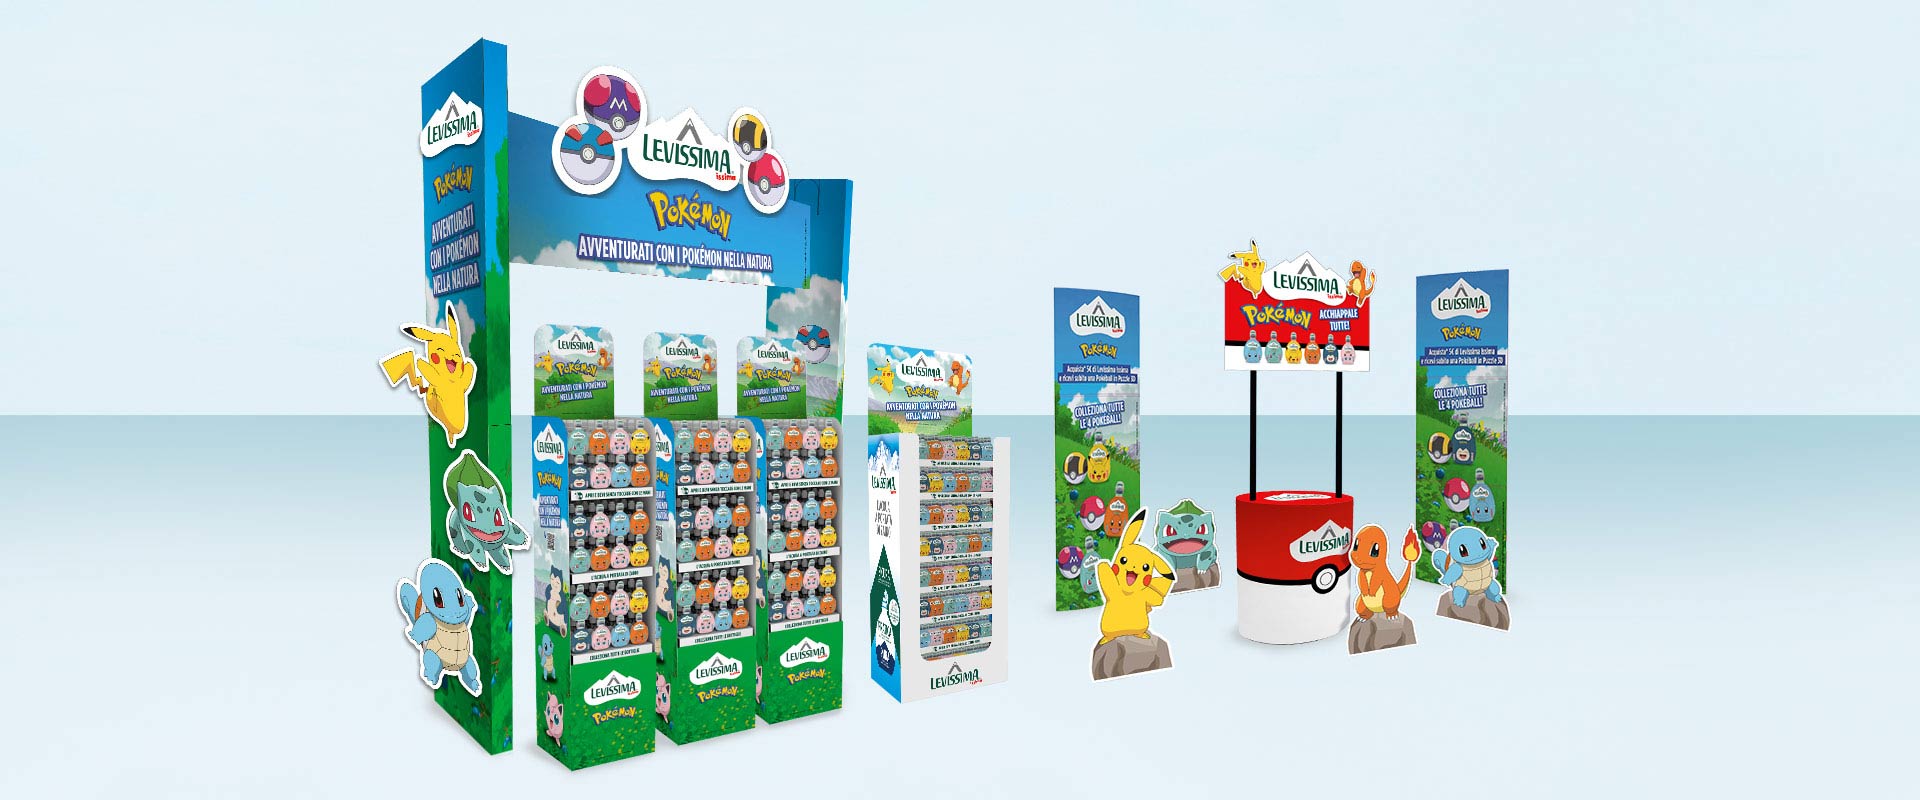 Arch, standing display units, cut-outs and a desk are the communication assets created to emphasize the Issima Pokémon project in the point of sale